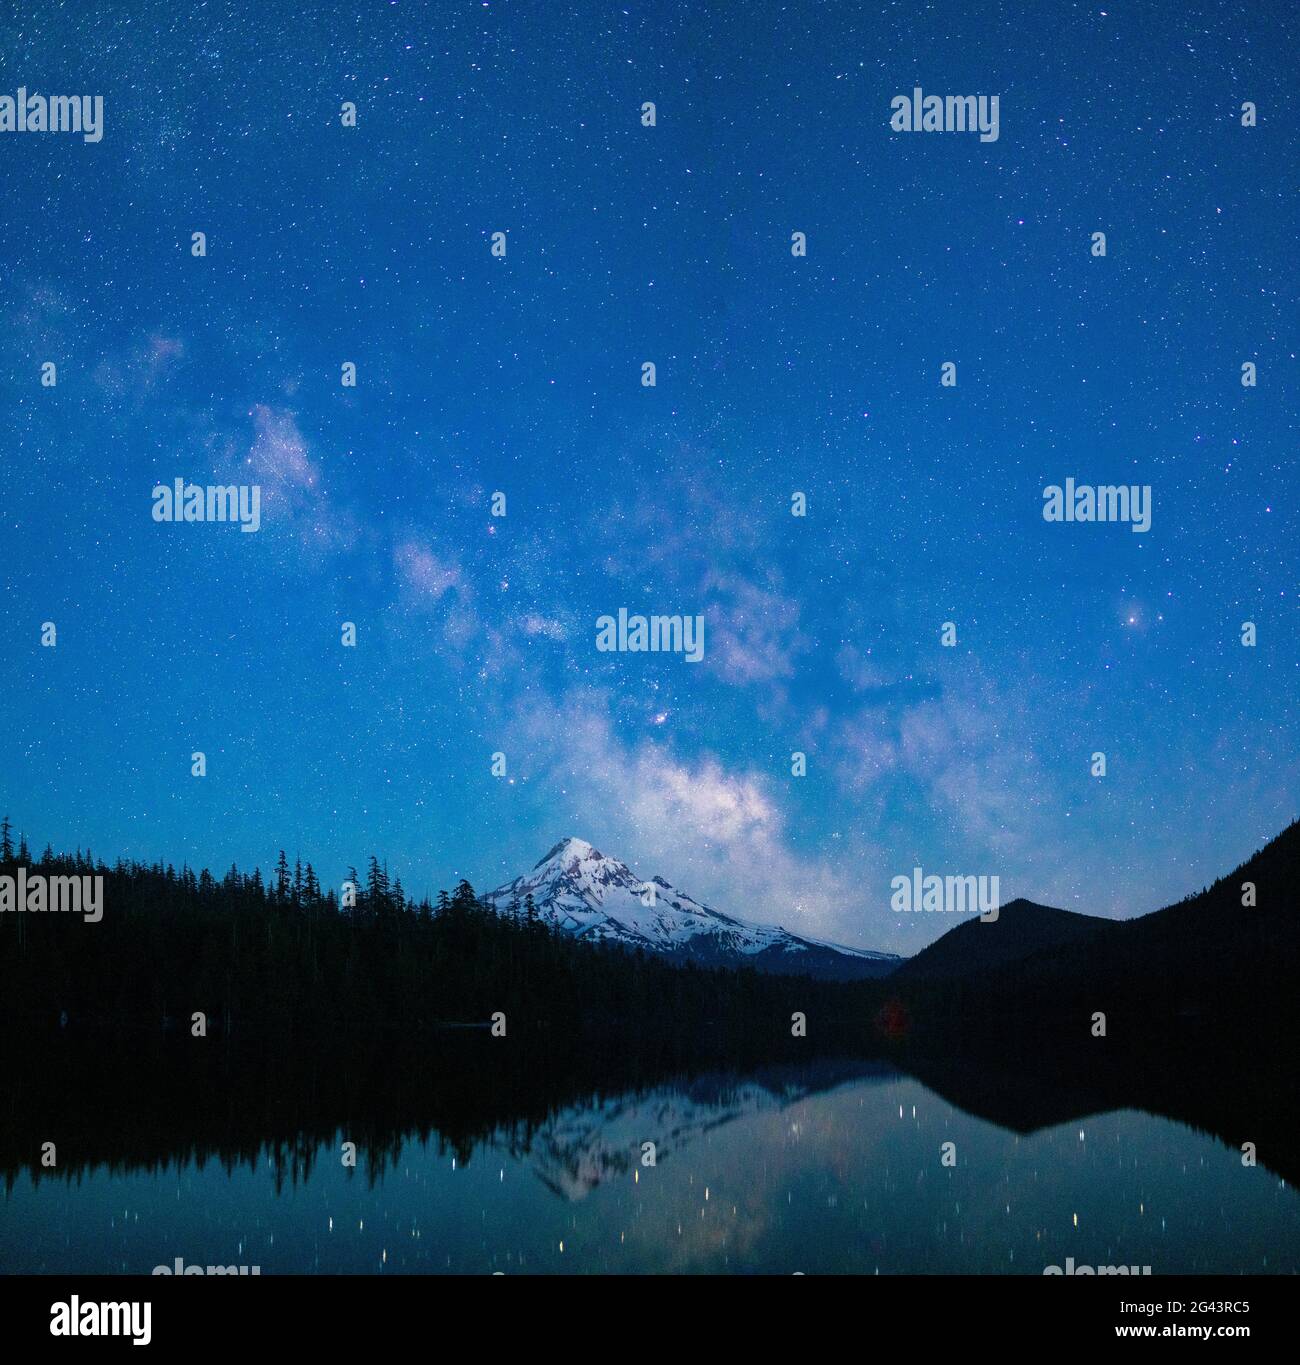 Milky Way and stars in sky at night above Mount Hood and Lost Lake, Oregon, USA Stock Photo